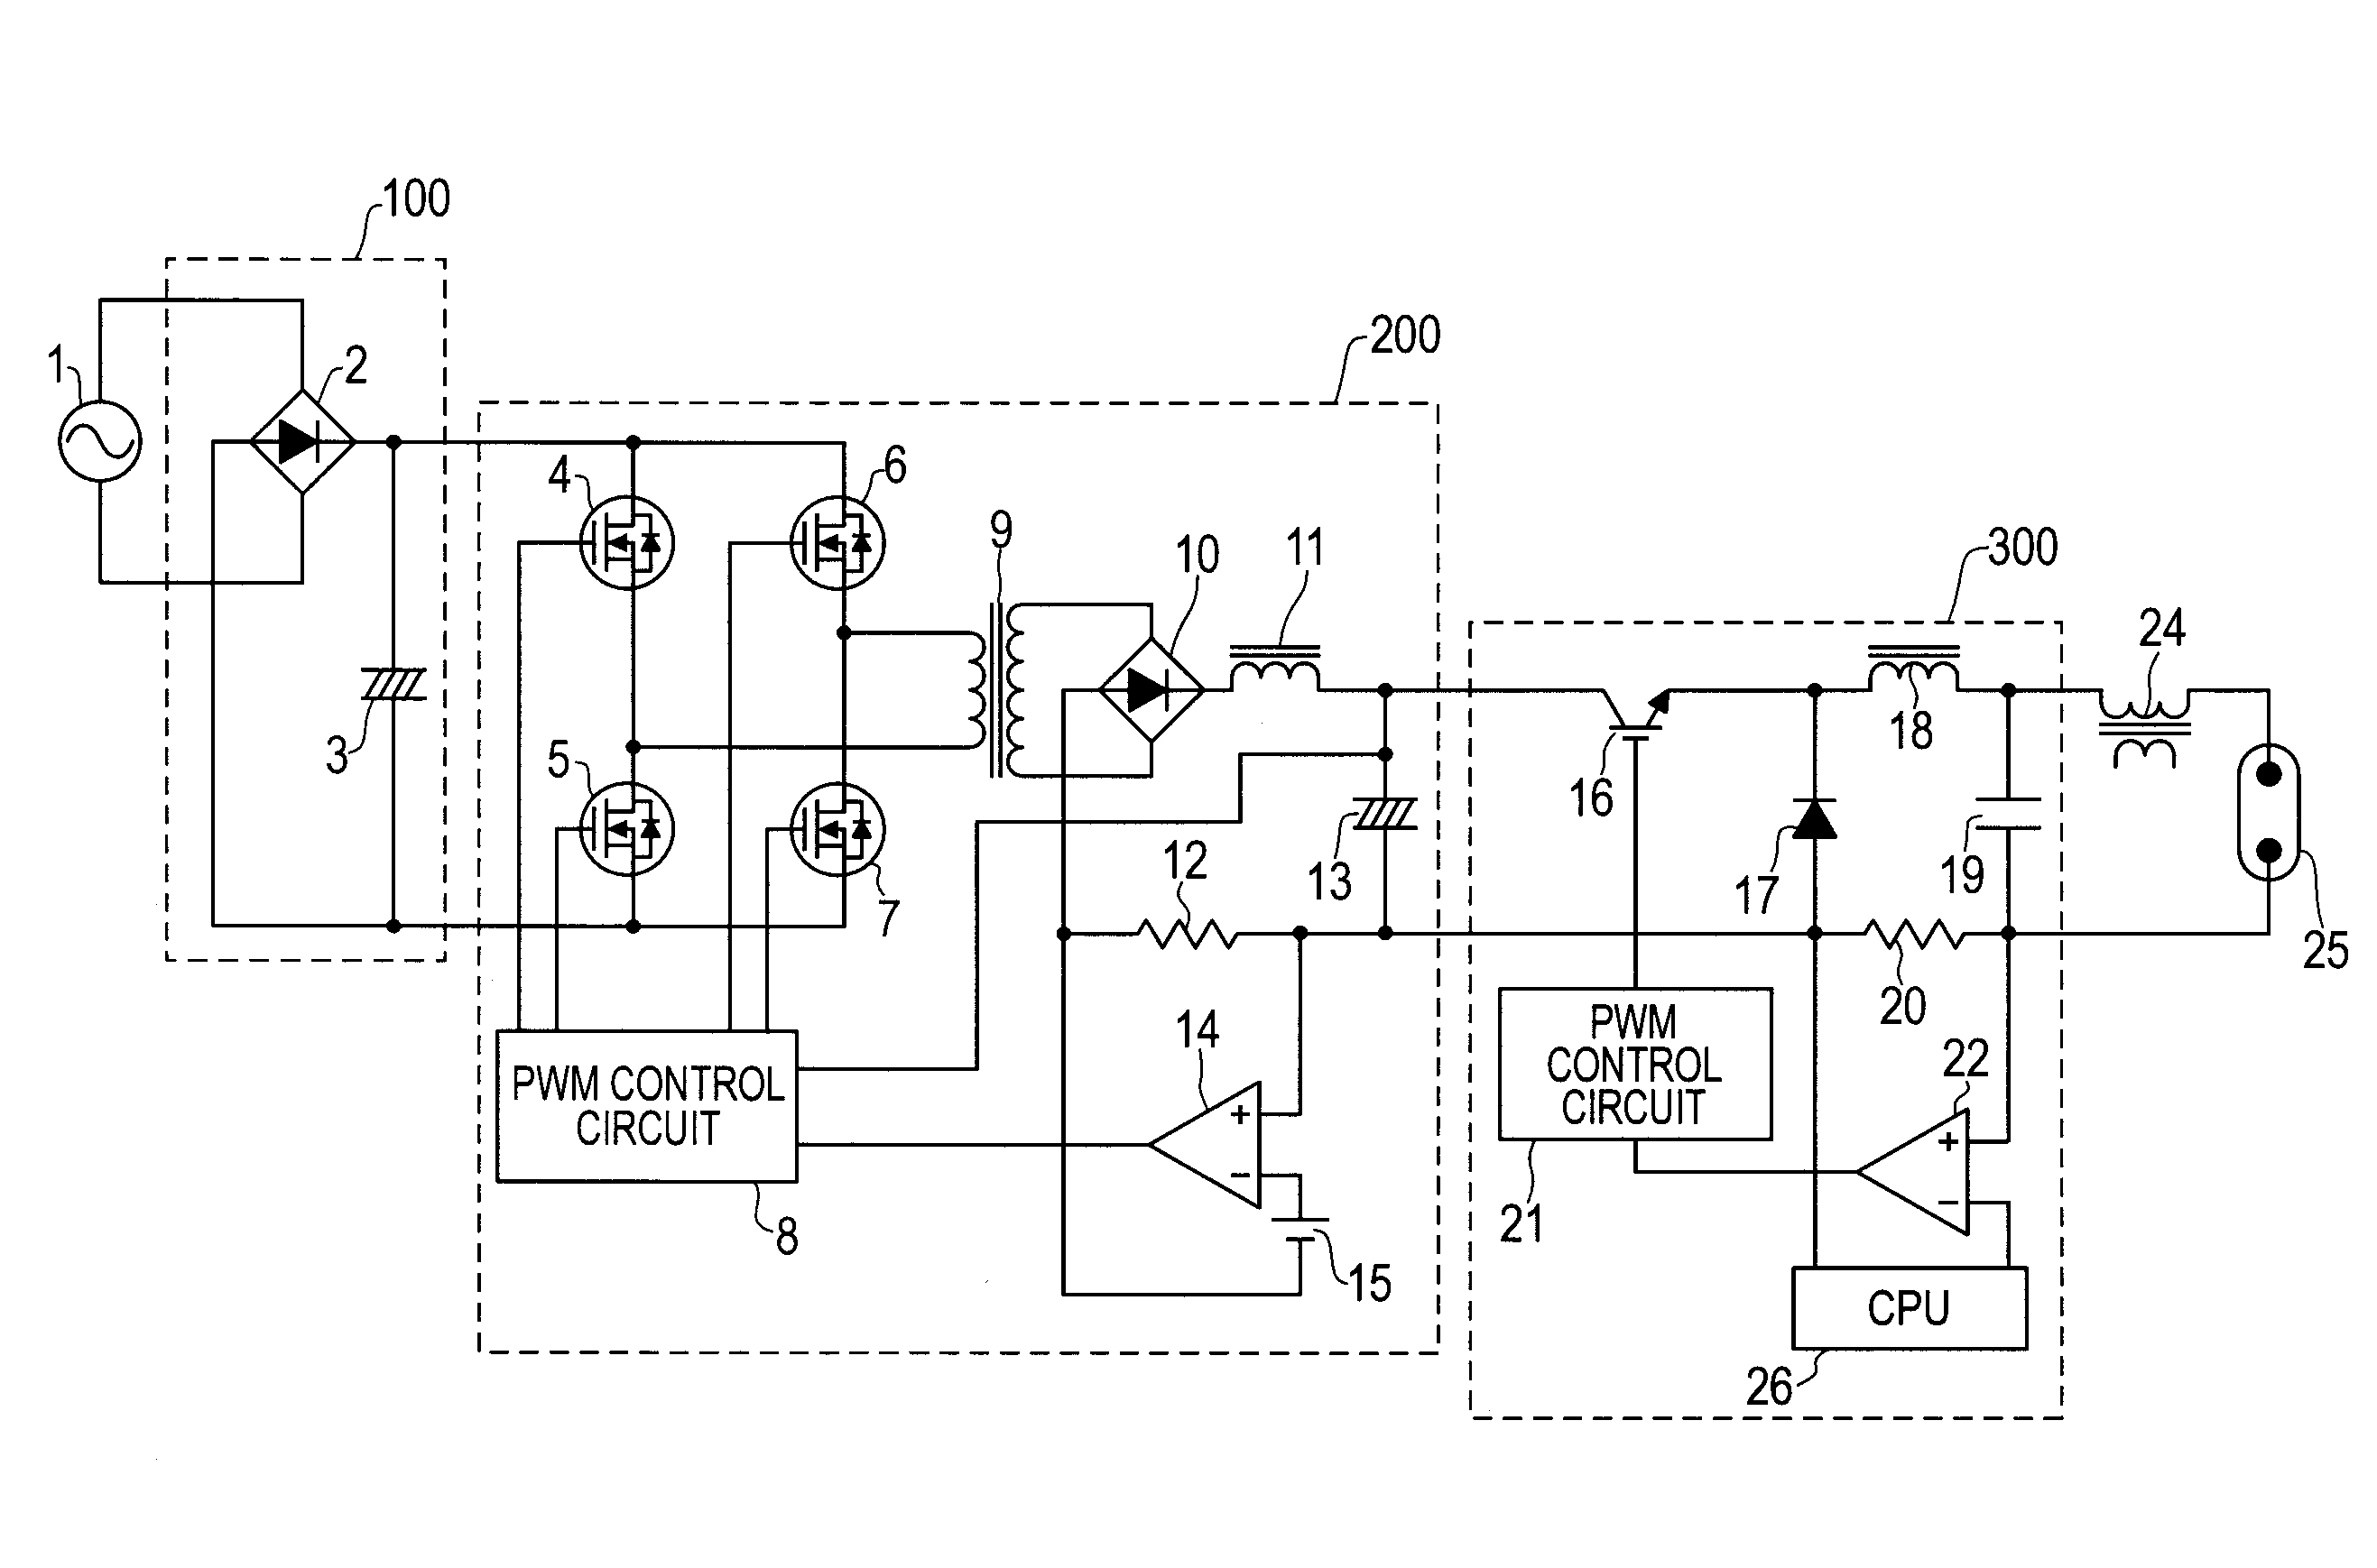 Xenon lamp drive unit, method for driving xenon lamp, and artificial solar light irradiation unit